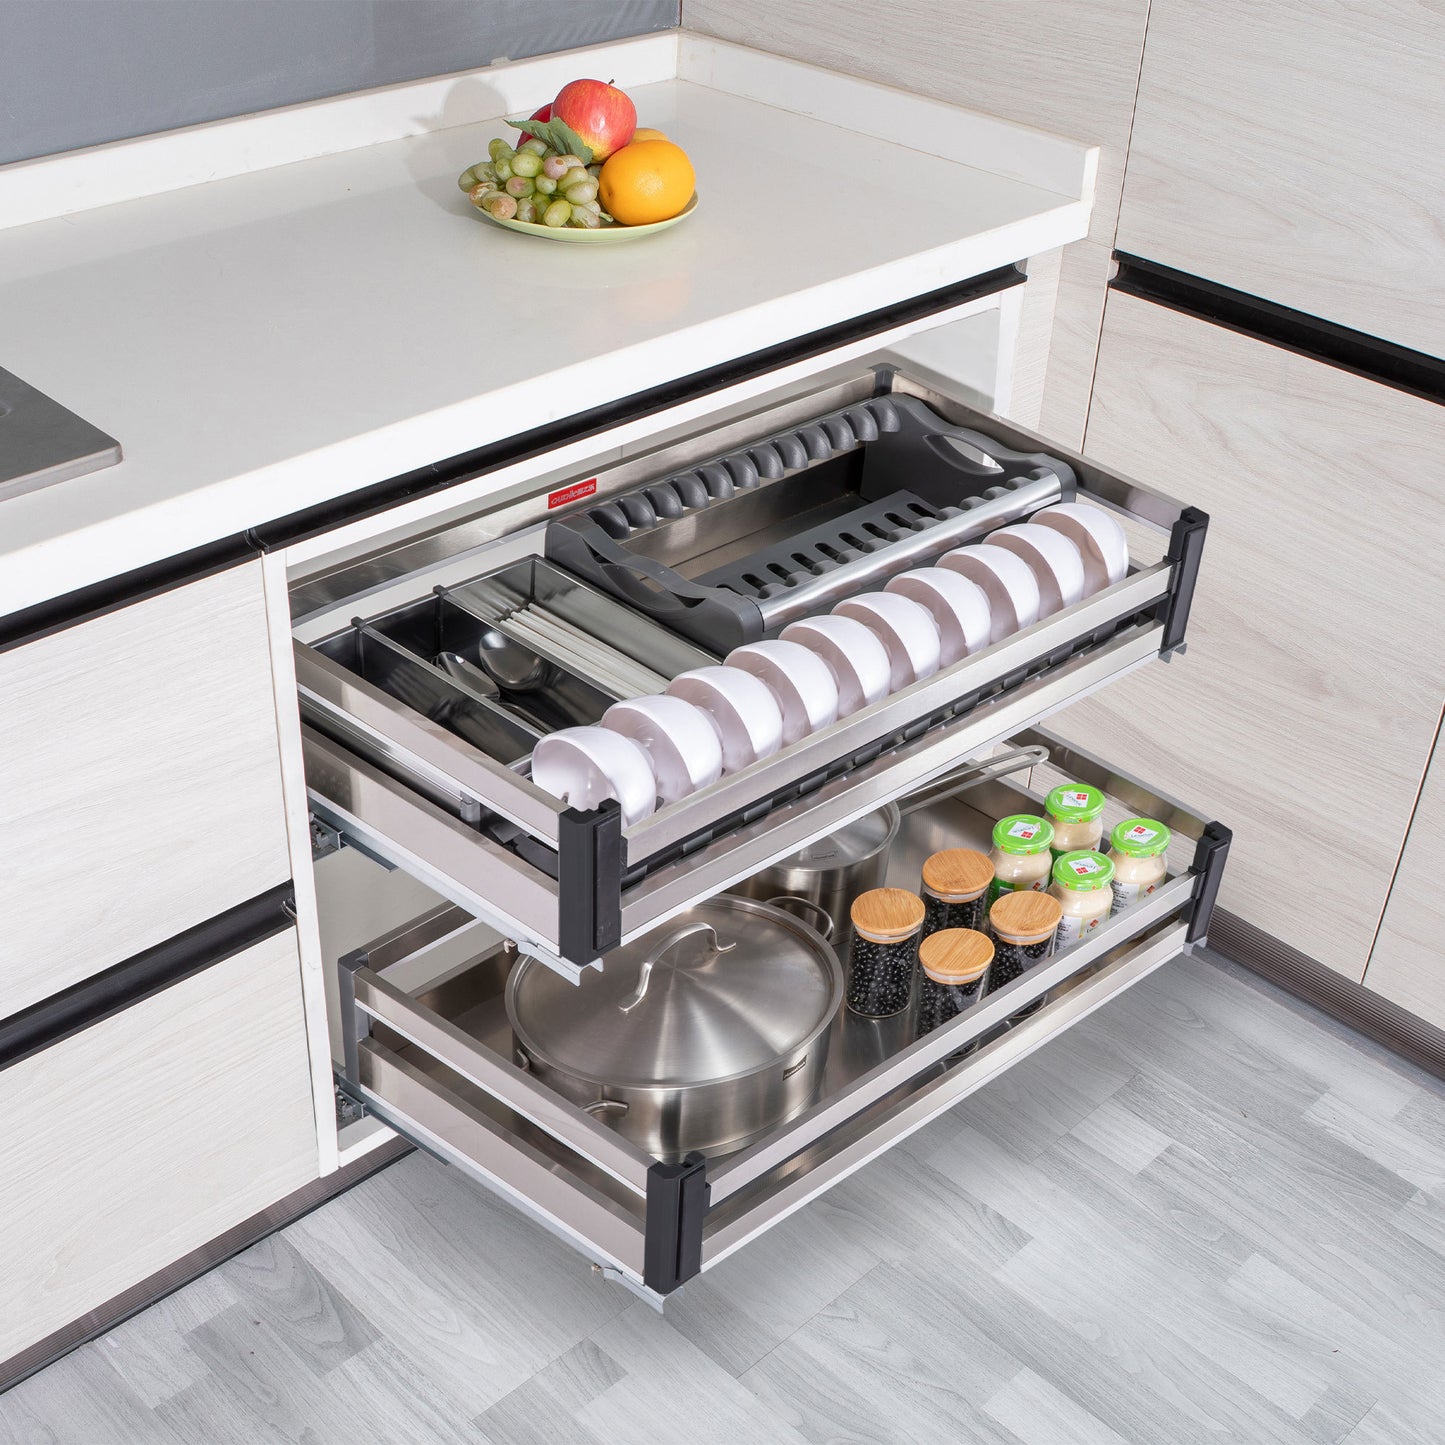 Stainless Steel 81.4cm Cabinet Pull Out Basket